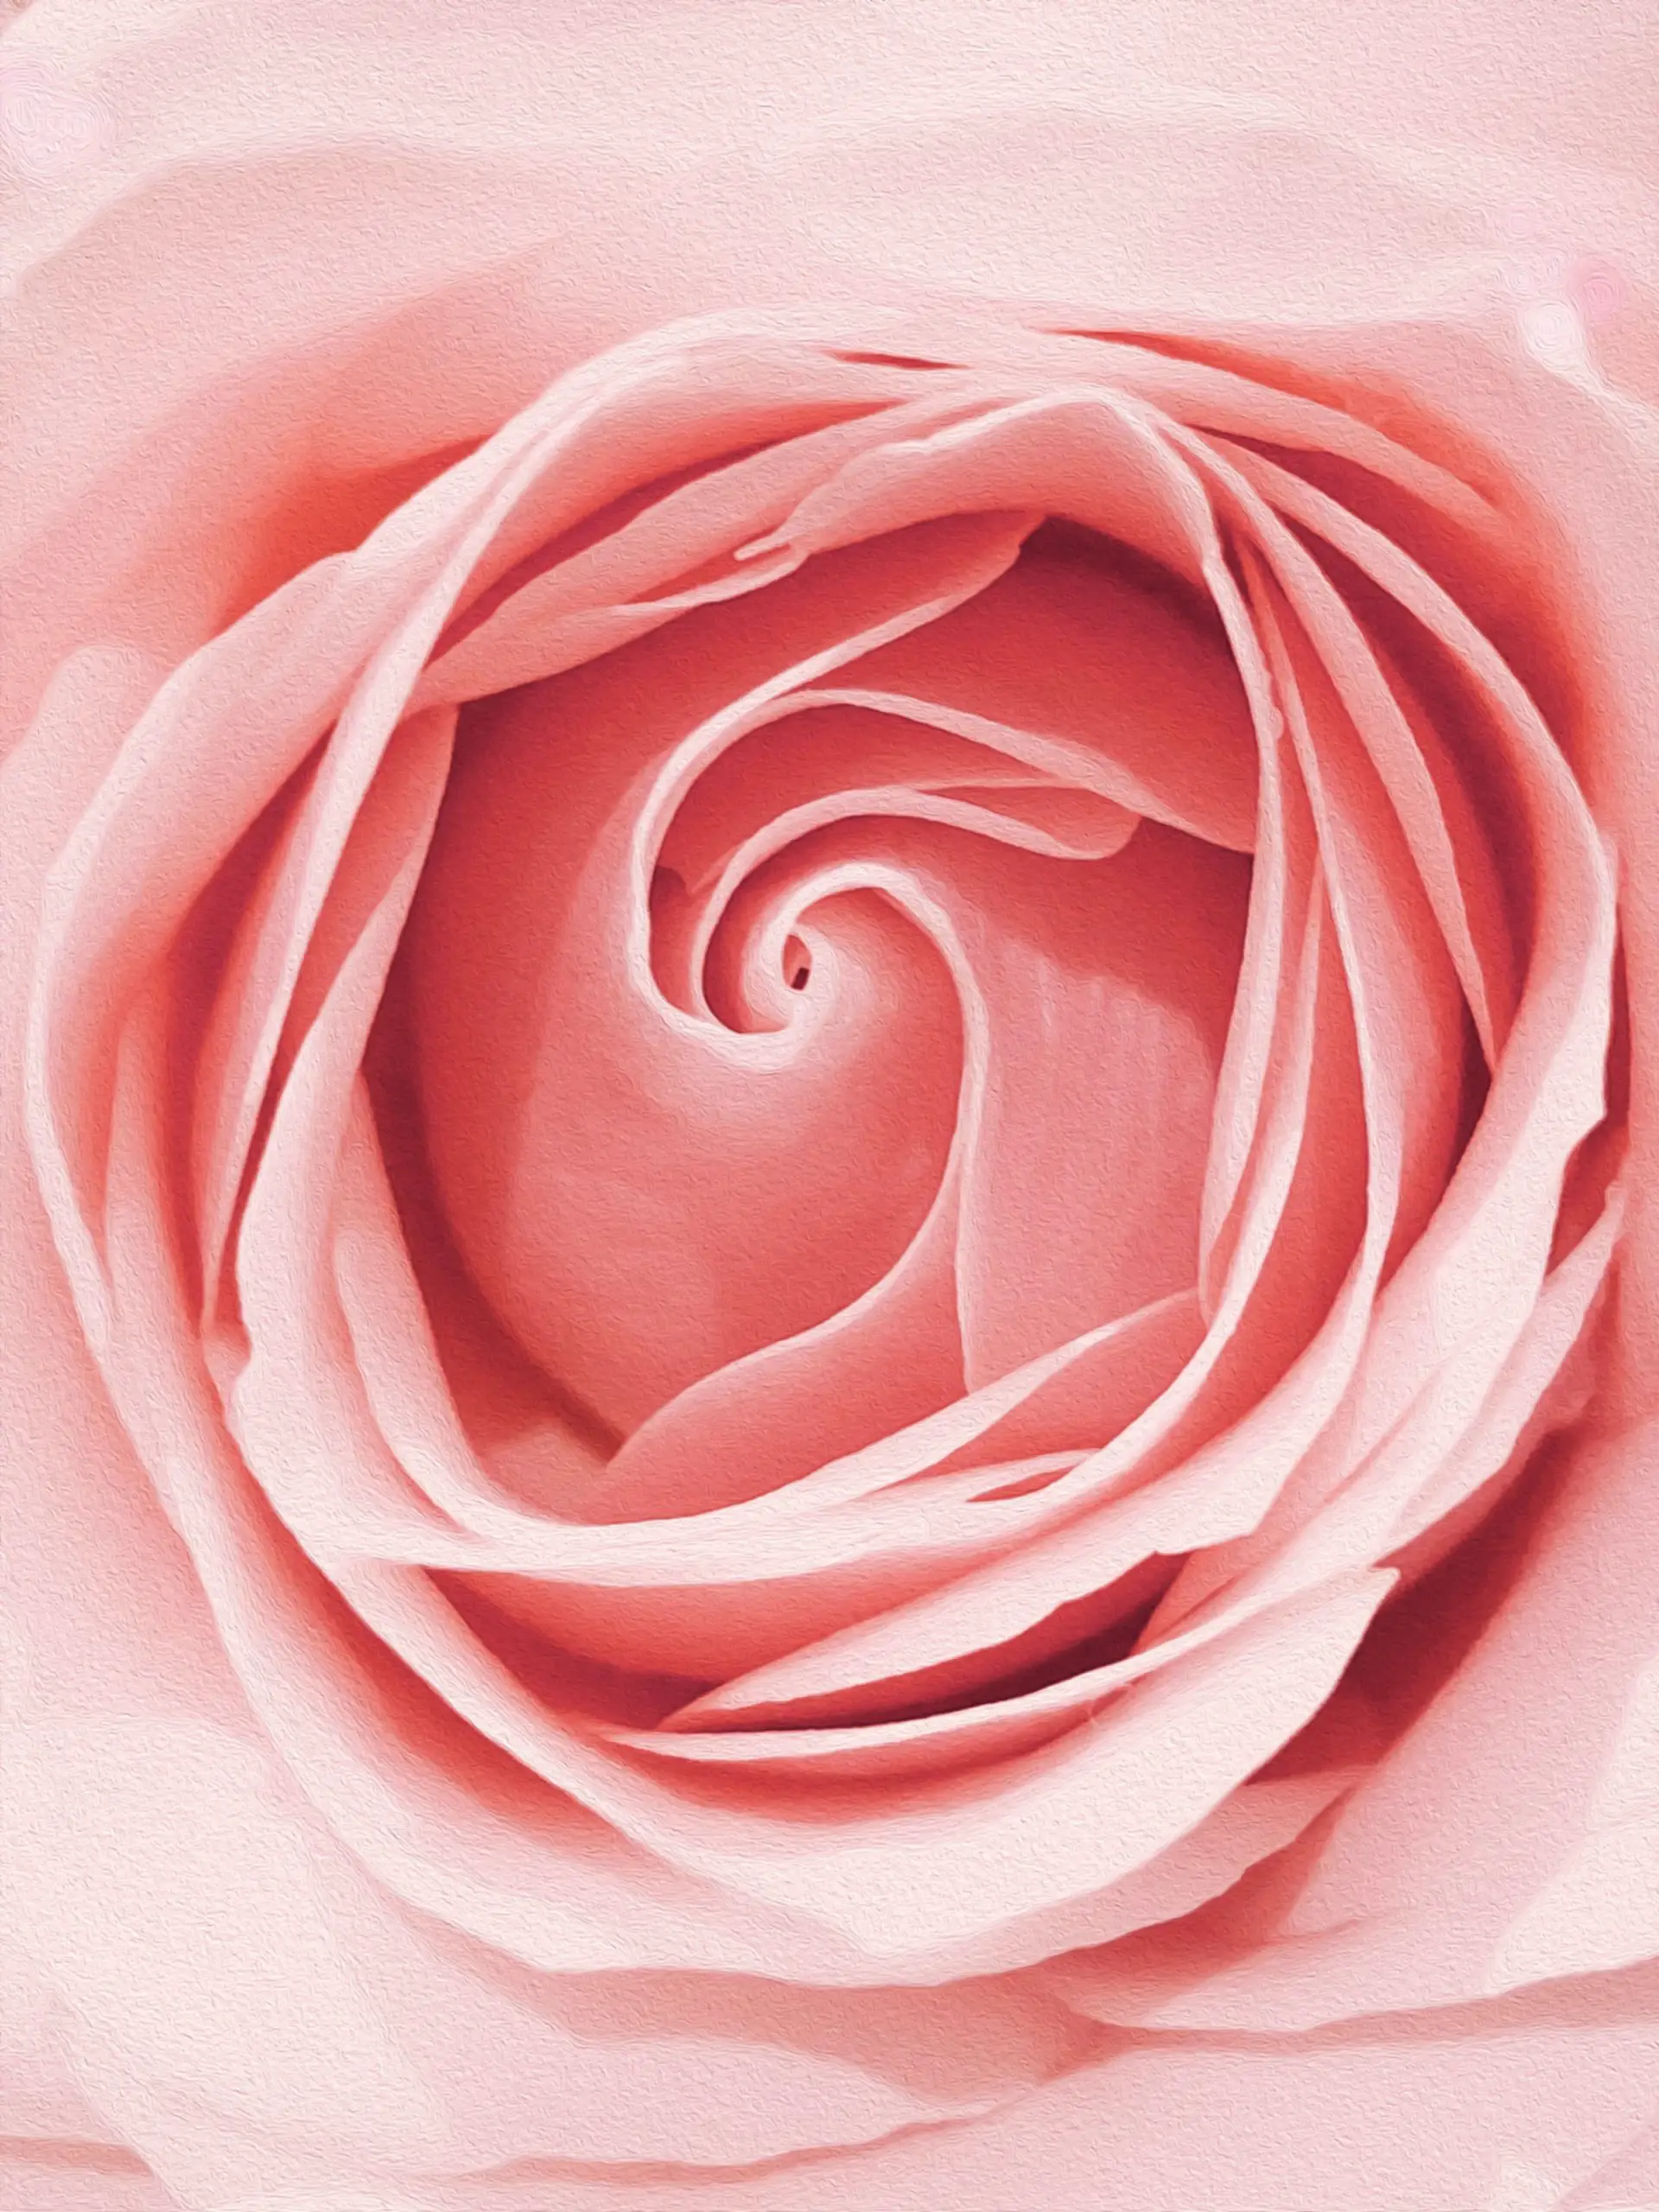 The Ultimate Guide To The Best Rose Perfumes